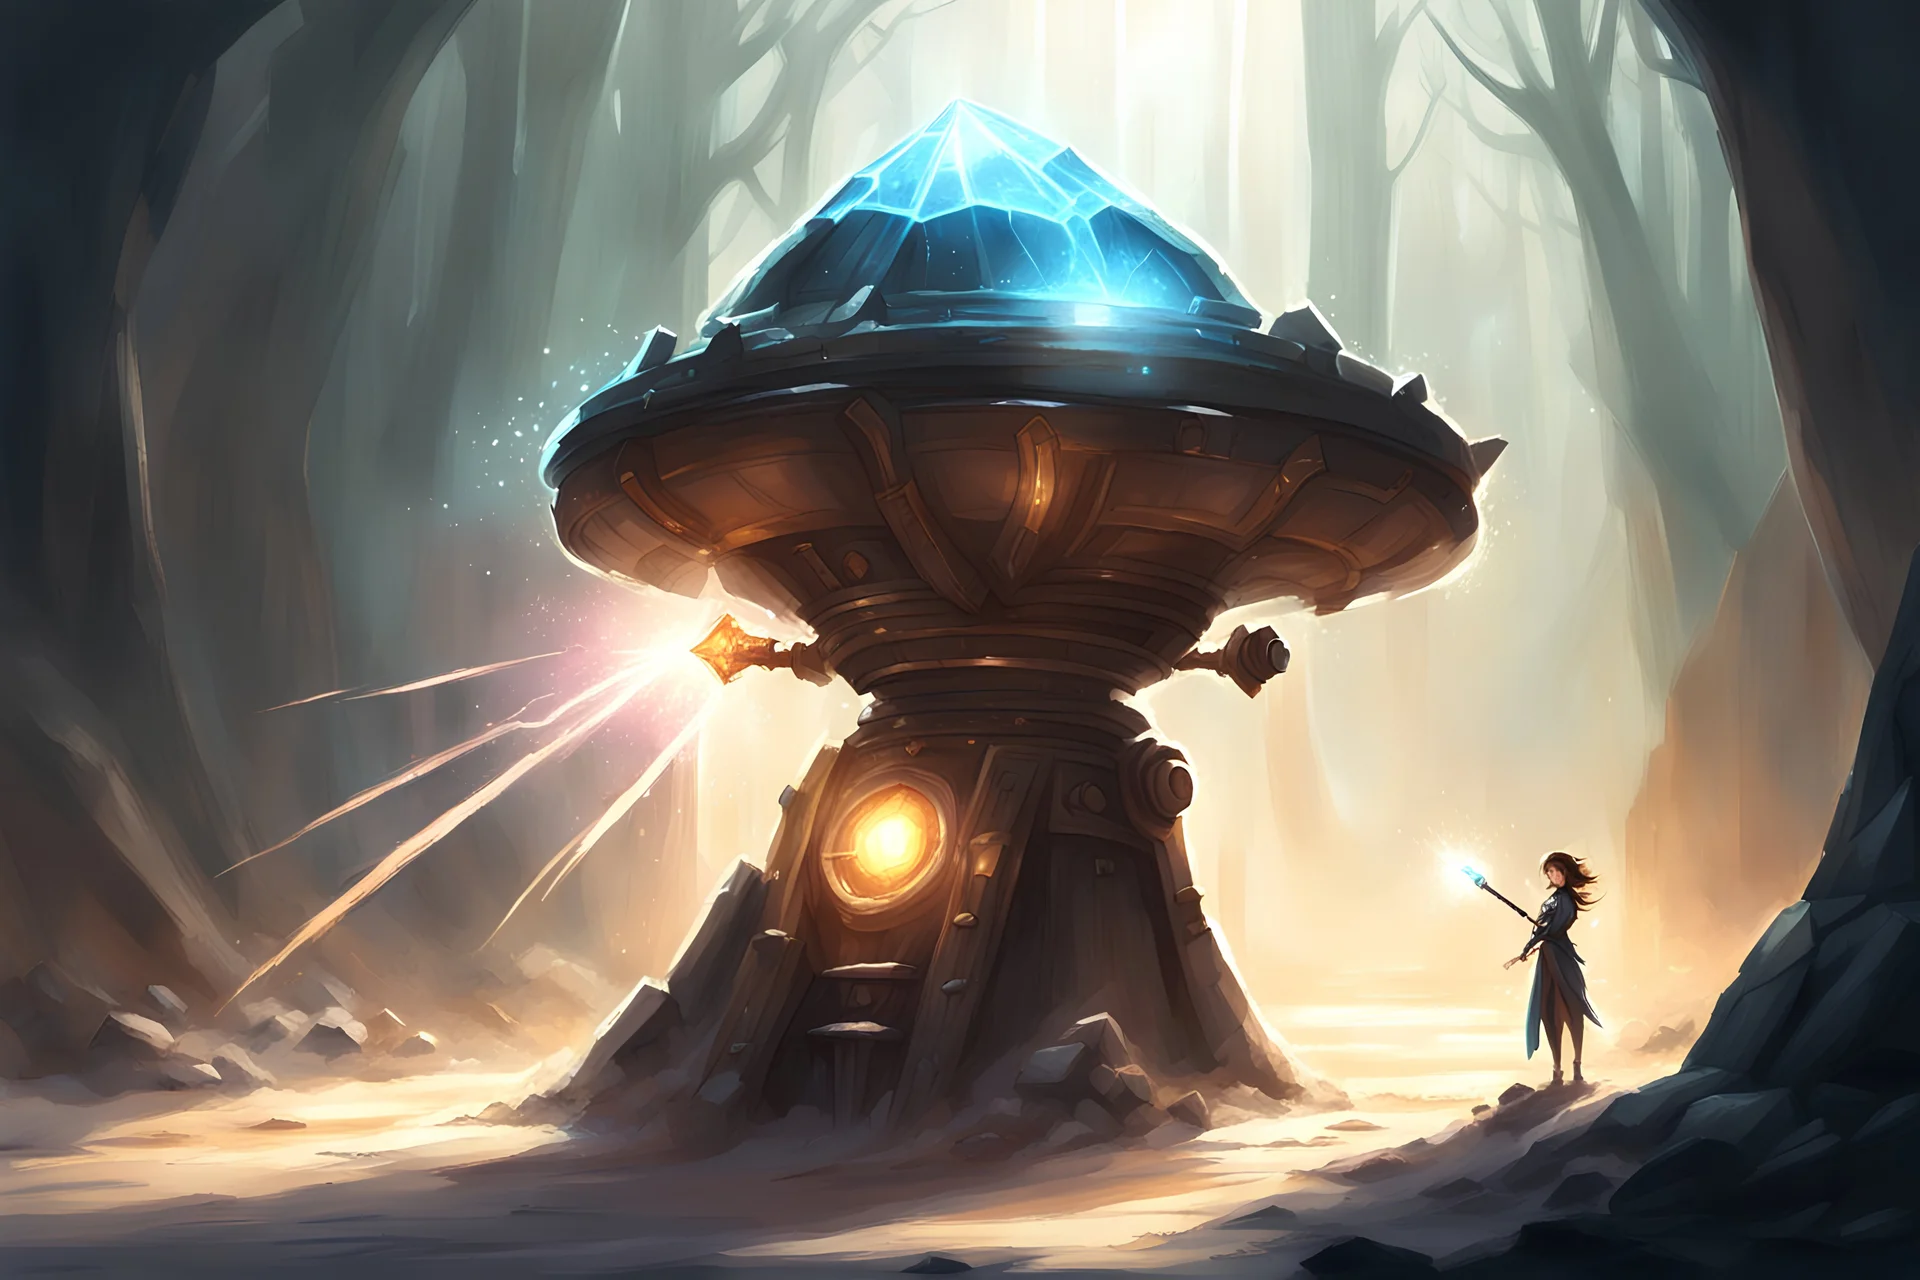 fantasy concept art, small walking magic turret sketch shooting a ray of light though crystal